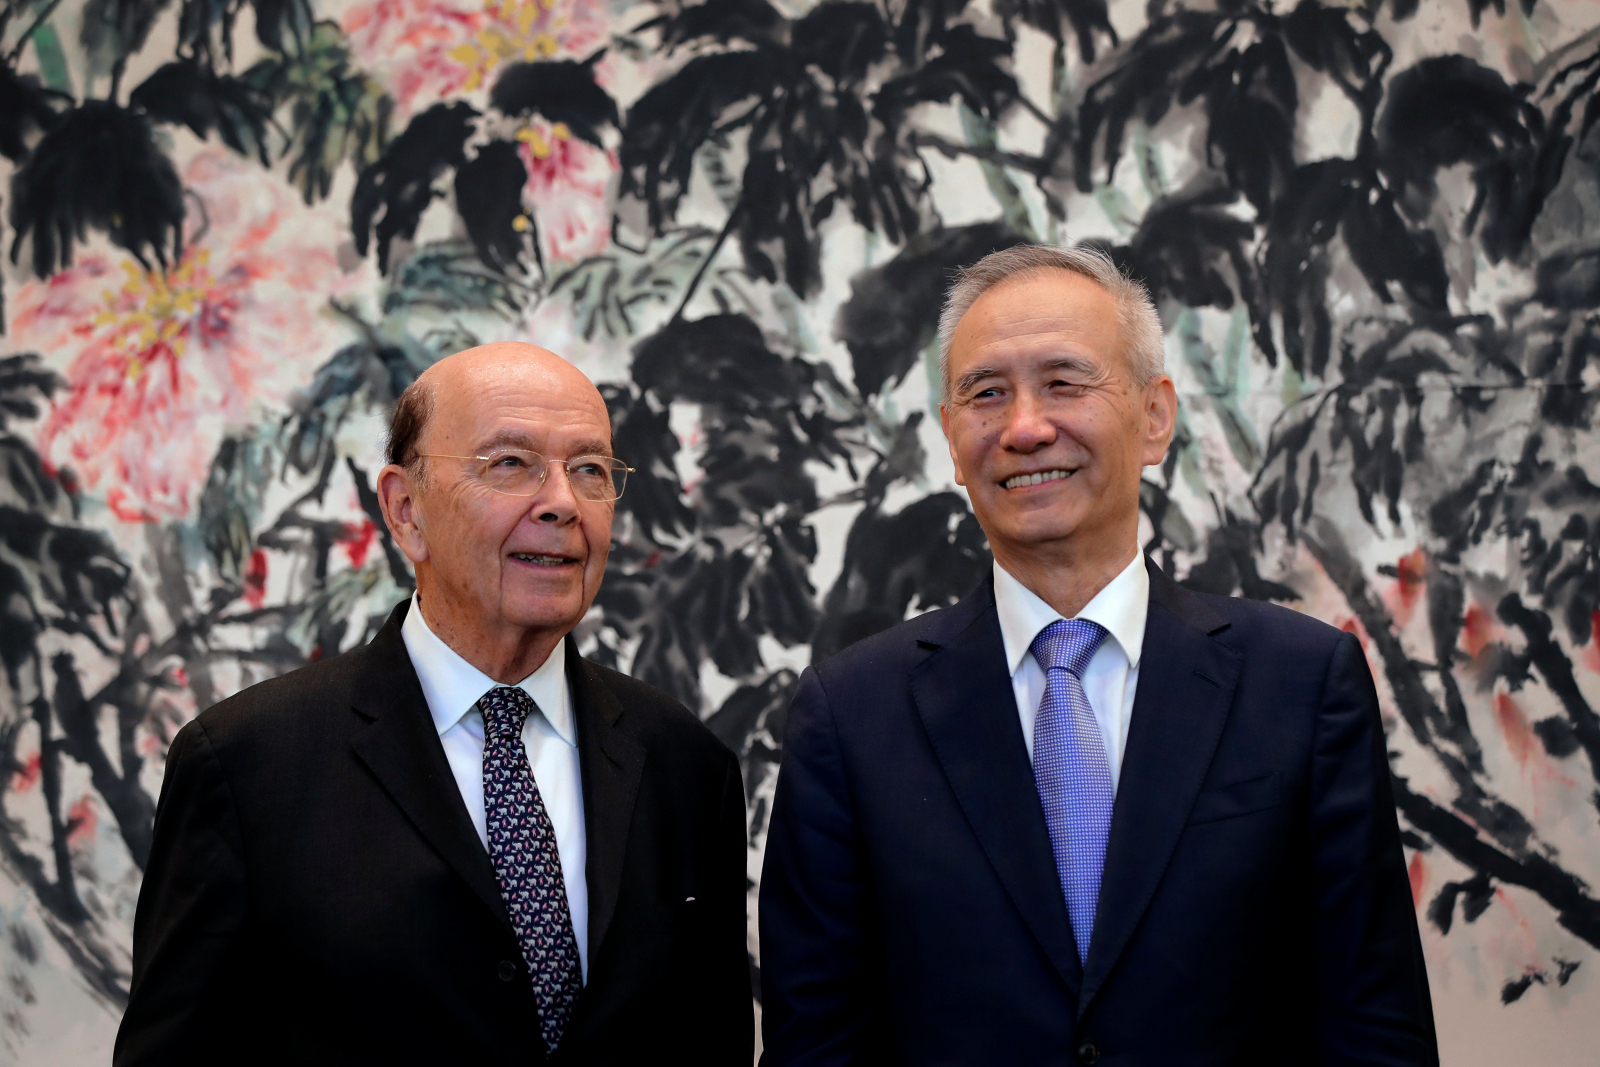 u-s-commerce-secretary-wilbur-ross-left-chats-chinese-vice-premier-liu-he-during-photograph